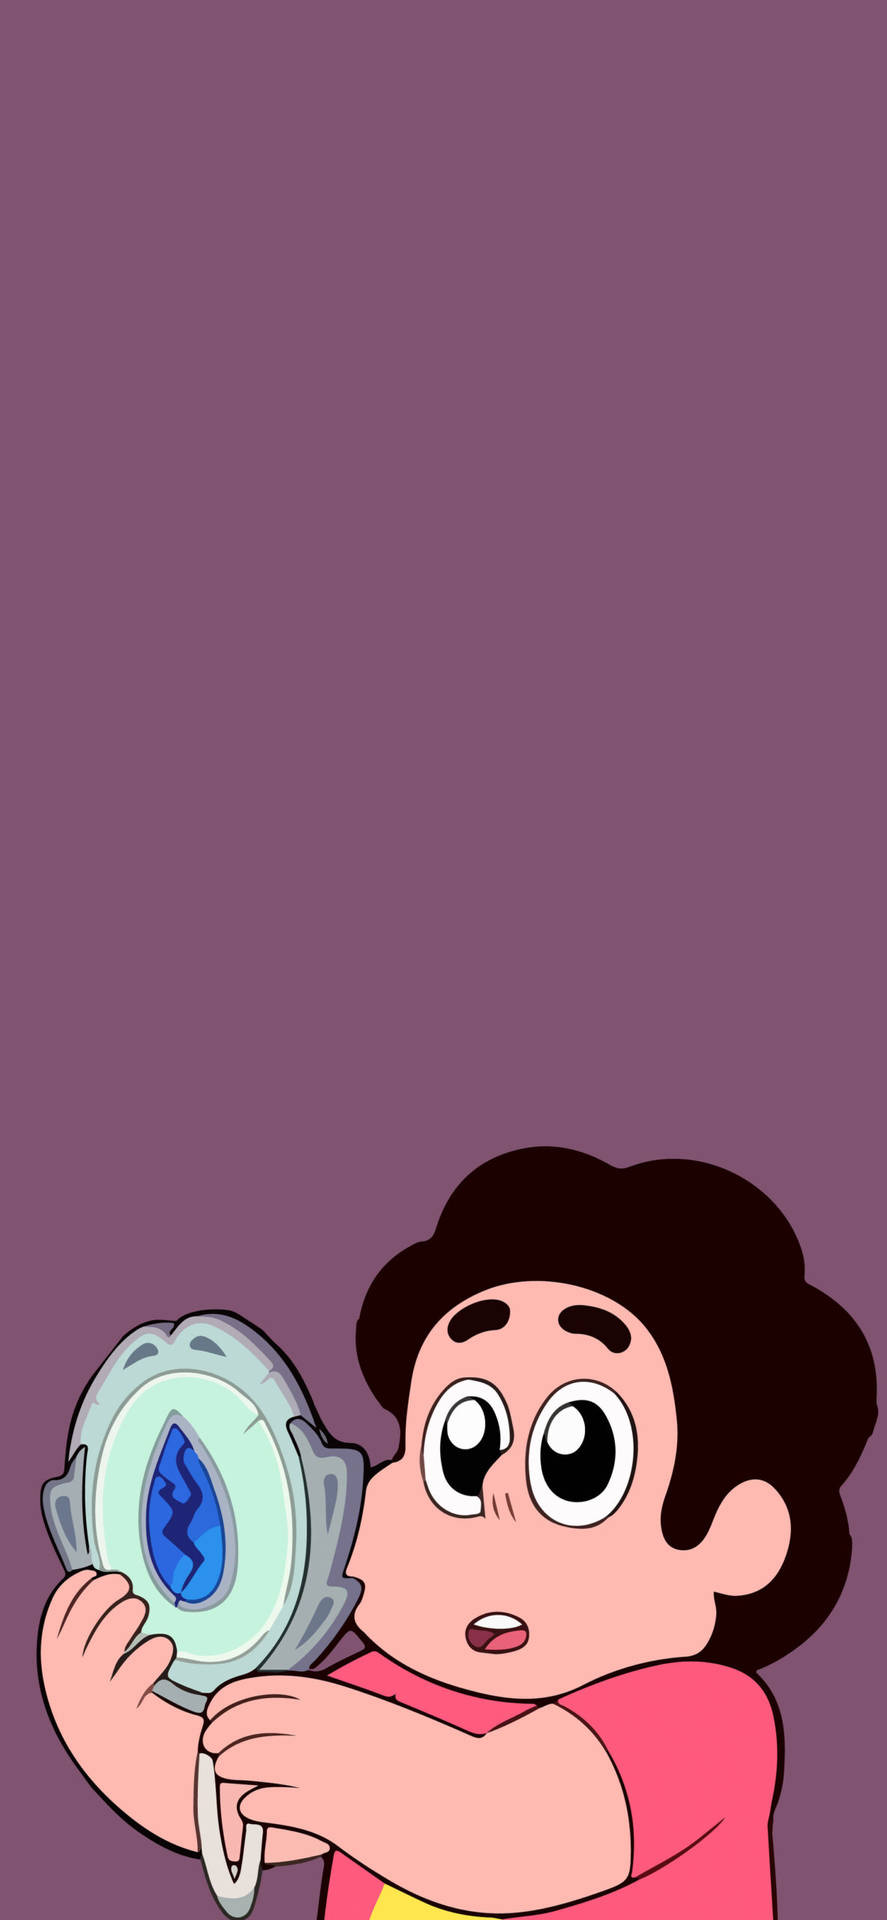 Steven Looking At Mirror Gem Animated Character Wallpaper